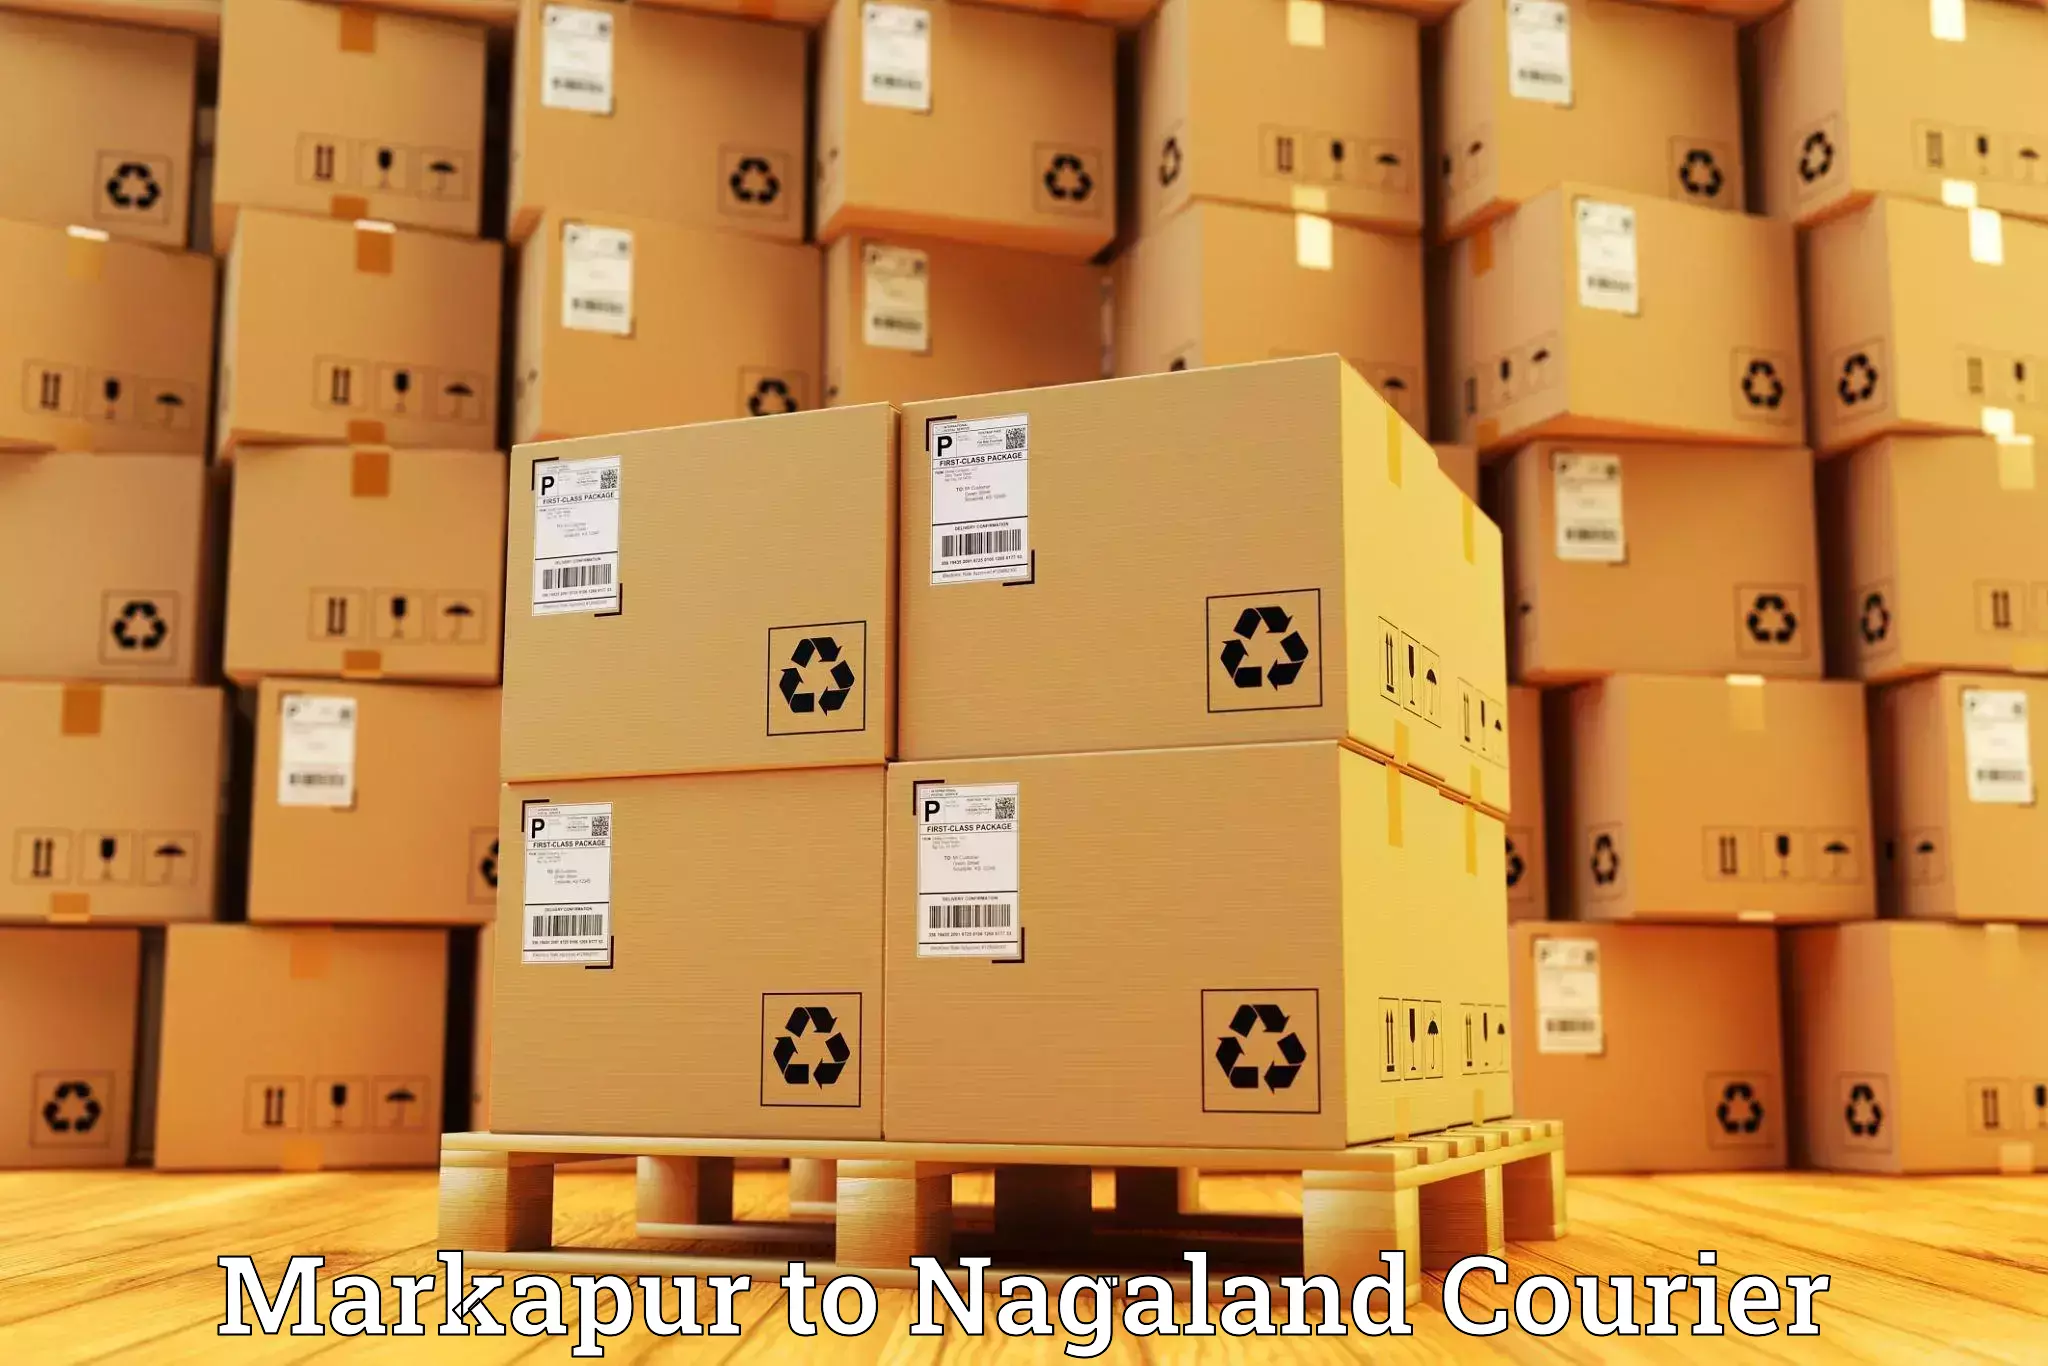 Express package delivery in Markapur to Nagaland